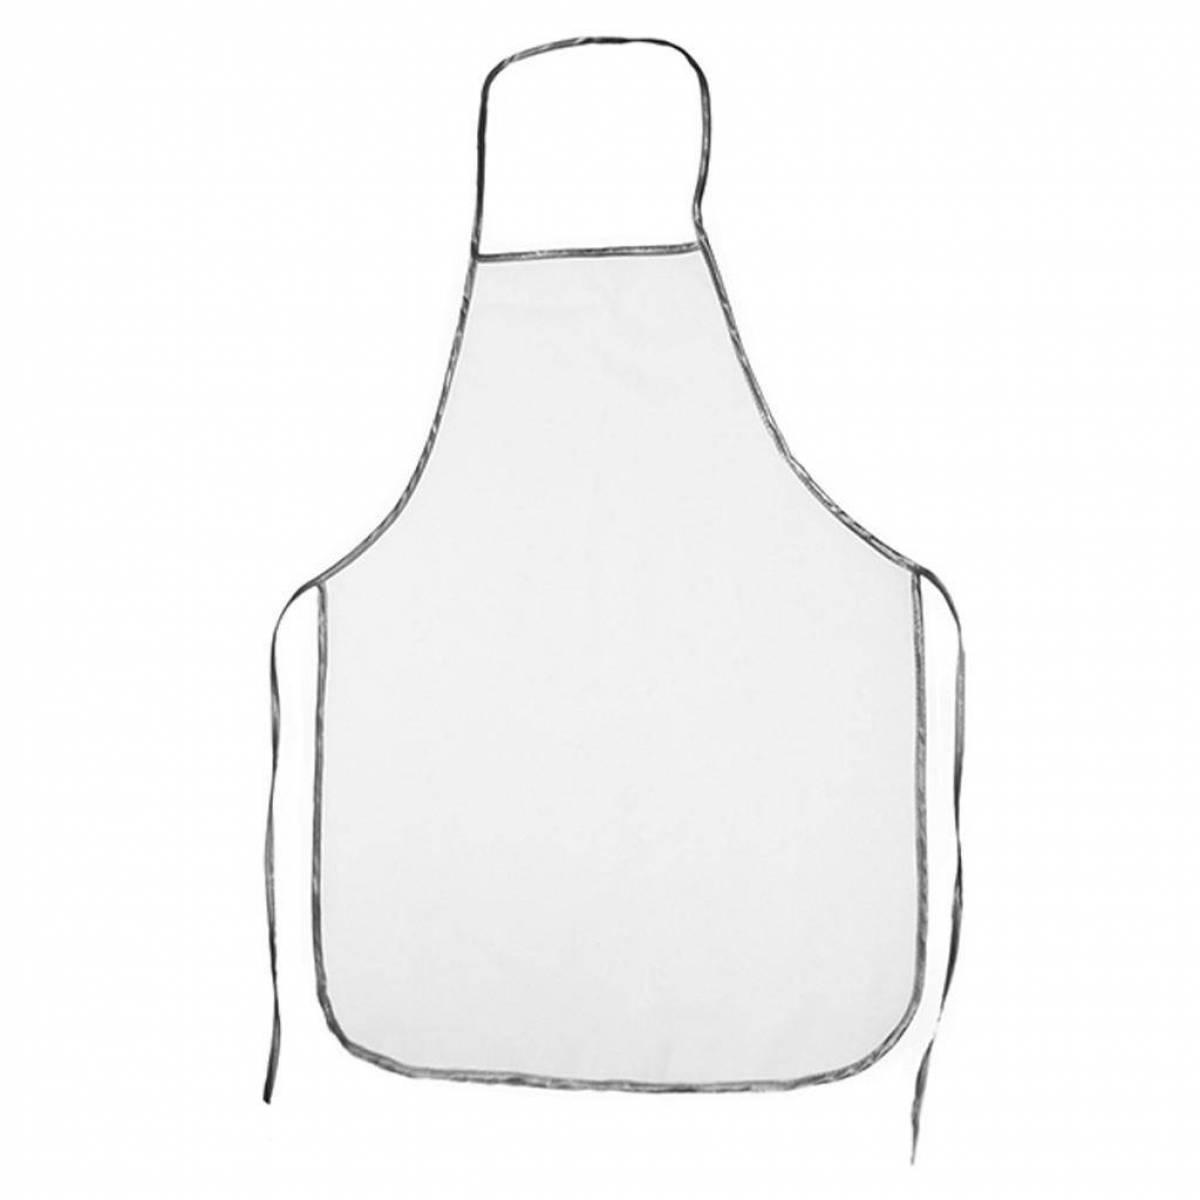 Colorful coloring apron for coloring lovers